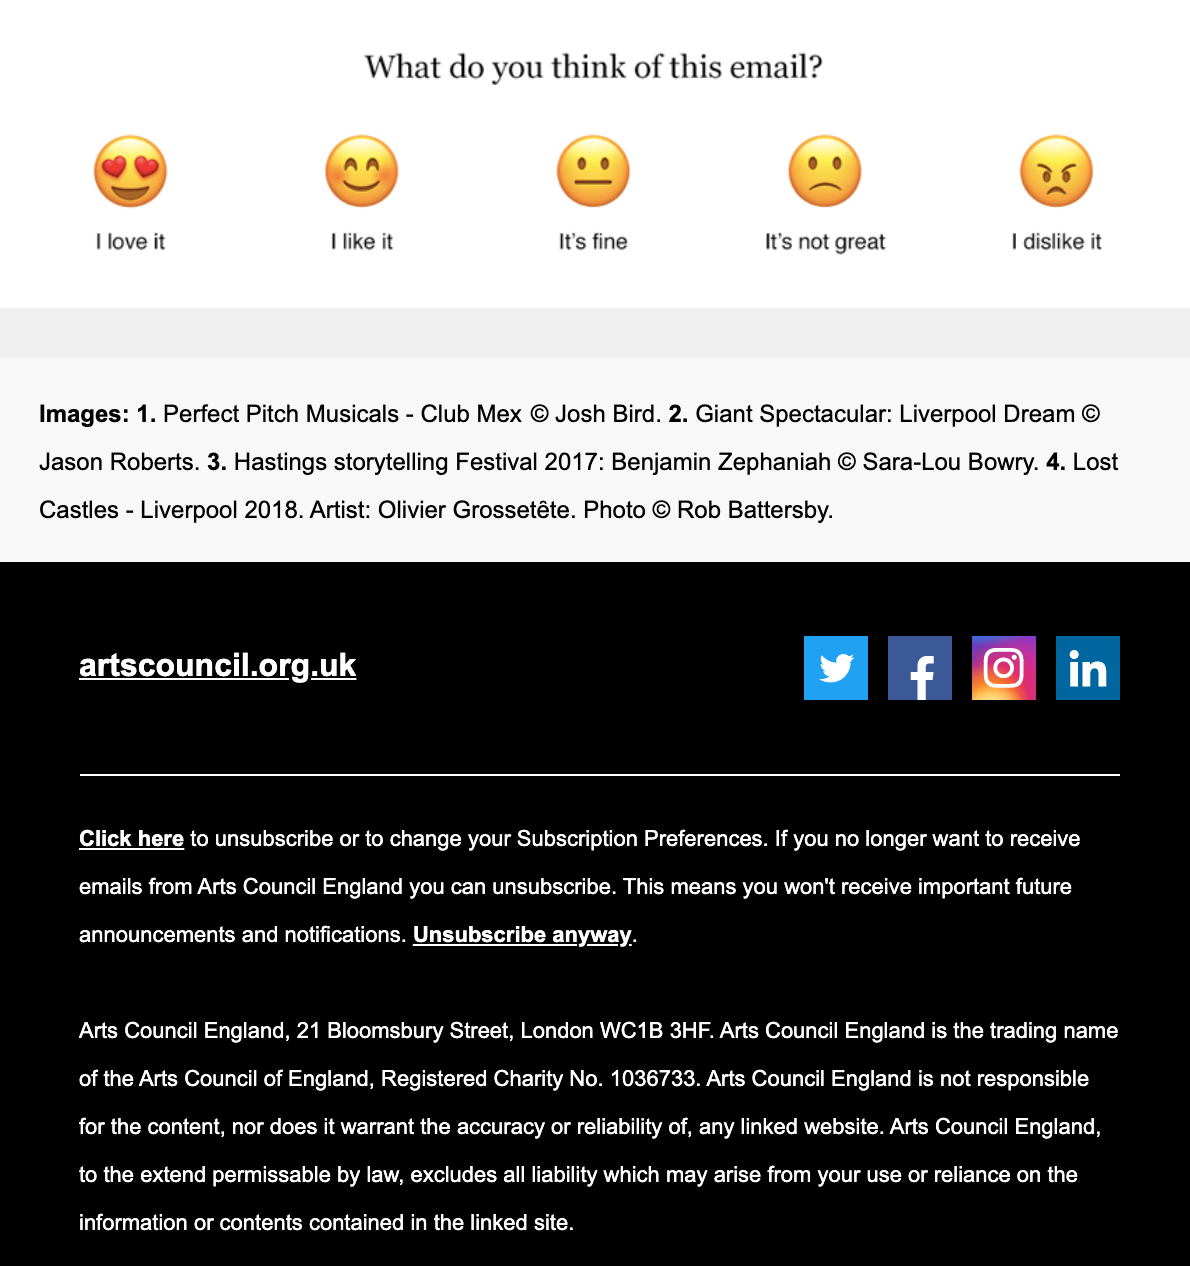 The final part of ACE's welcome email  features an embedded survey asking readers to rate the email. It also includes links to their social media platforms. 